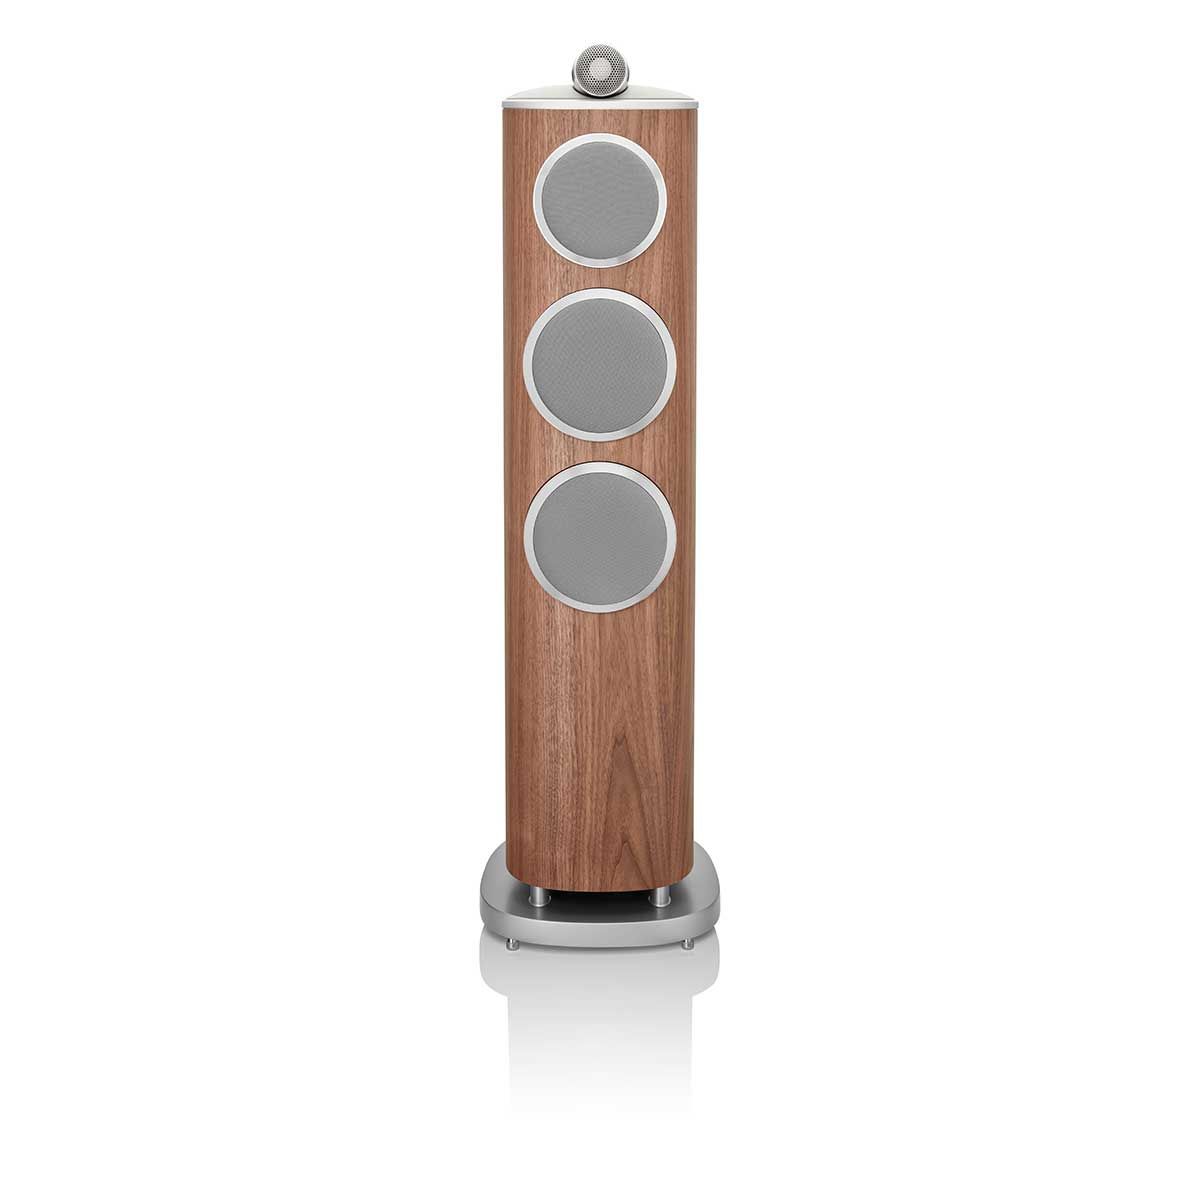 Bowers & Wilkins 804 D4 Floorstanding Speaker, Satin Walnut, front view with grille